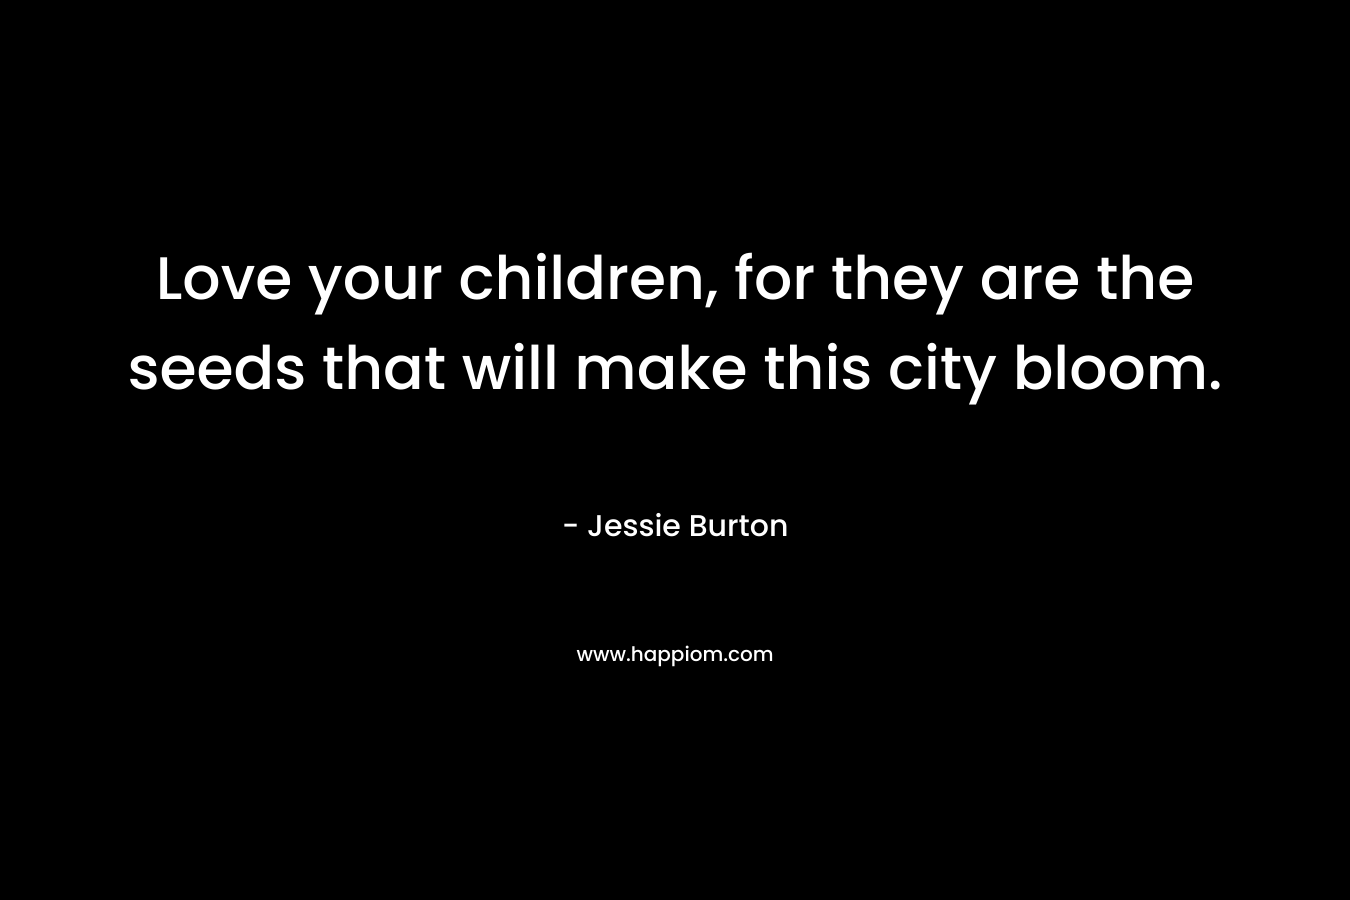 Love your children, for they are the seeds that will make this city bloom. – Jessie Burton